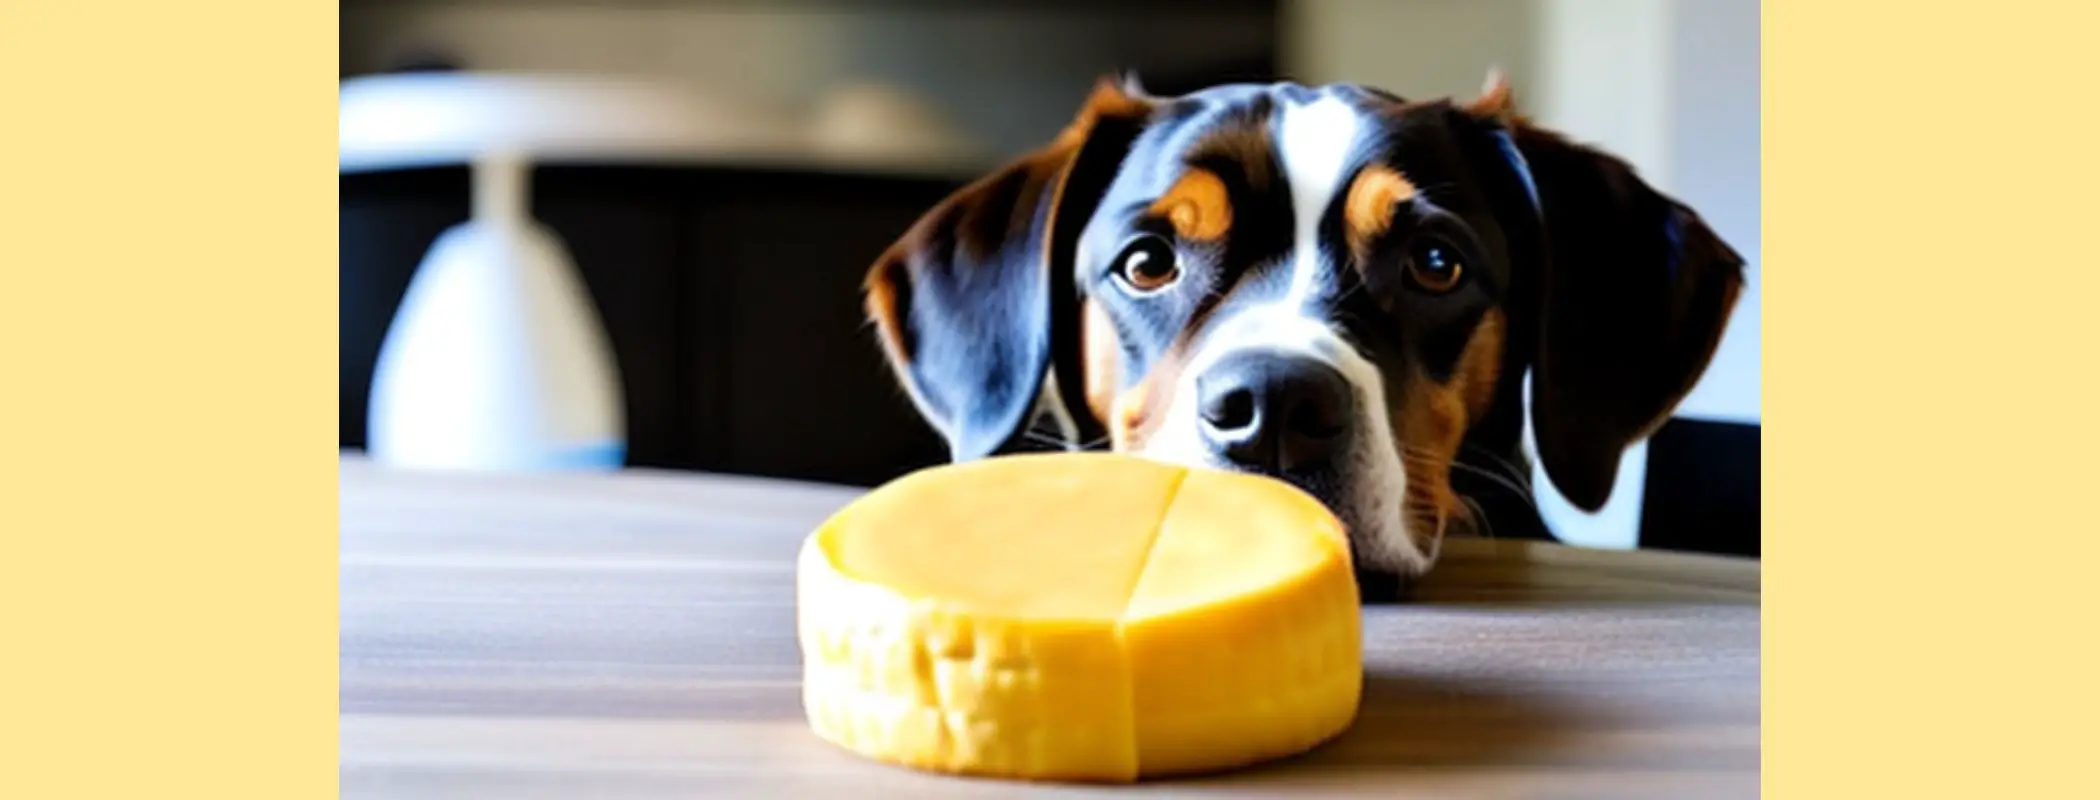 Can Dogs Eat Cheese Popcorn?